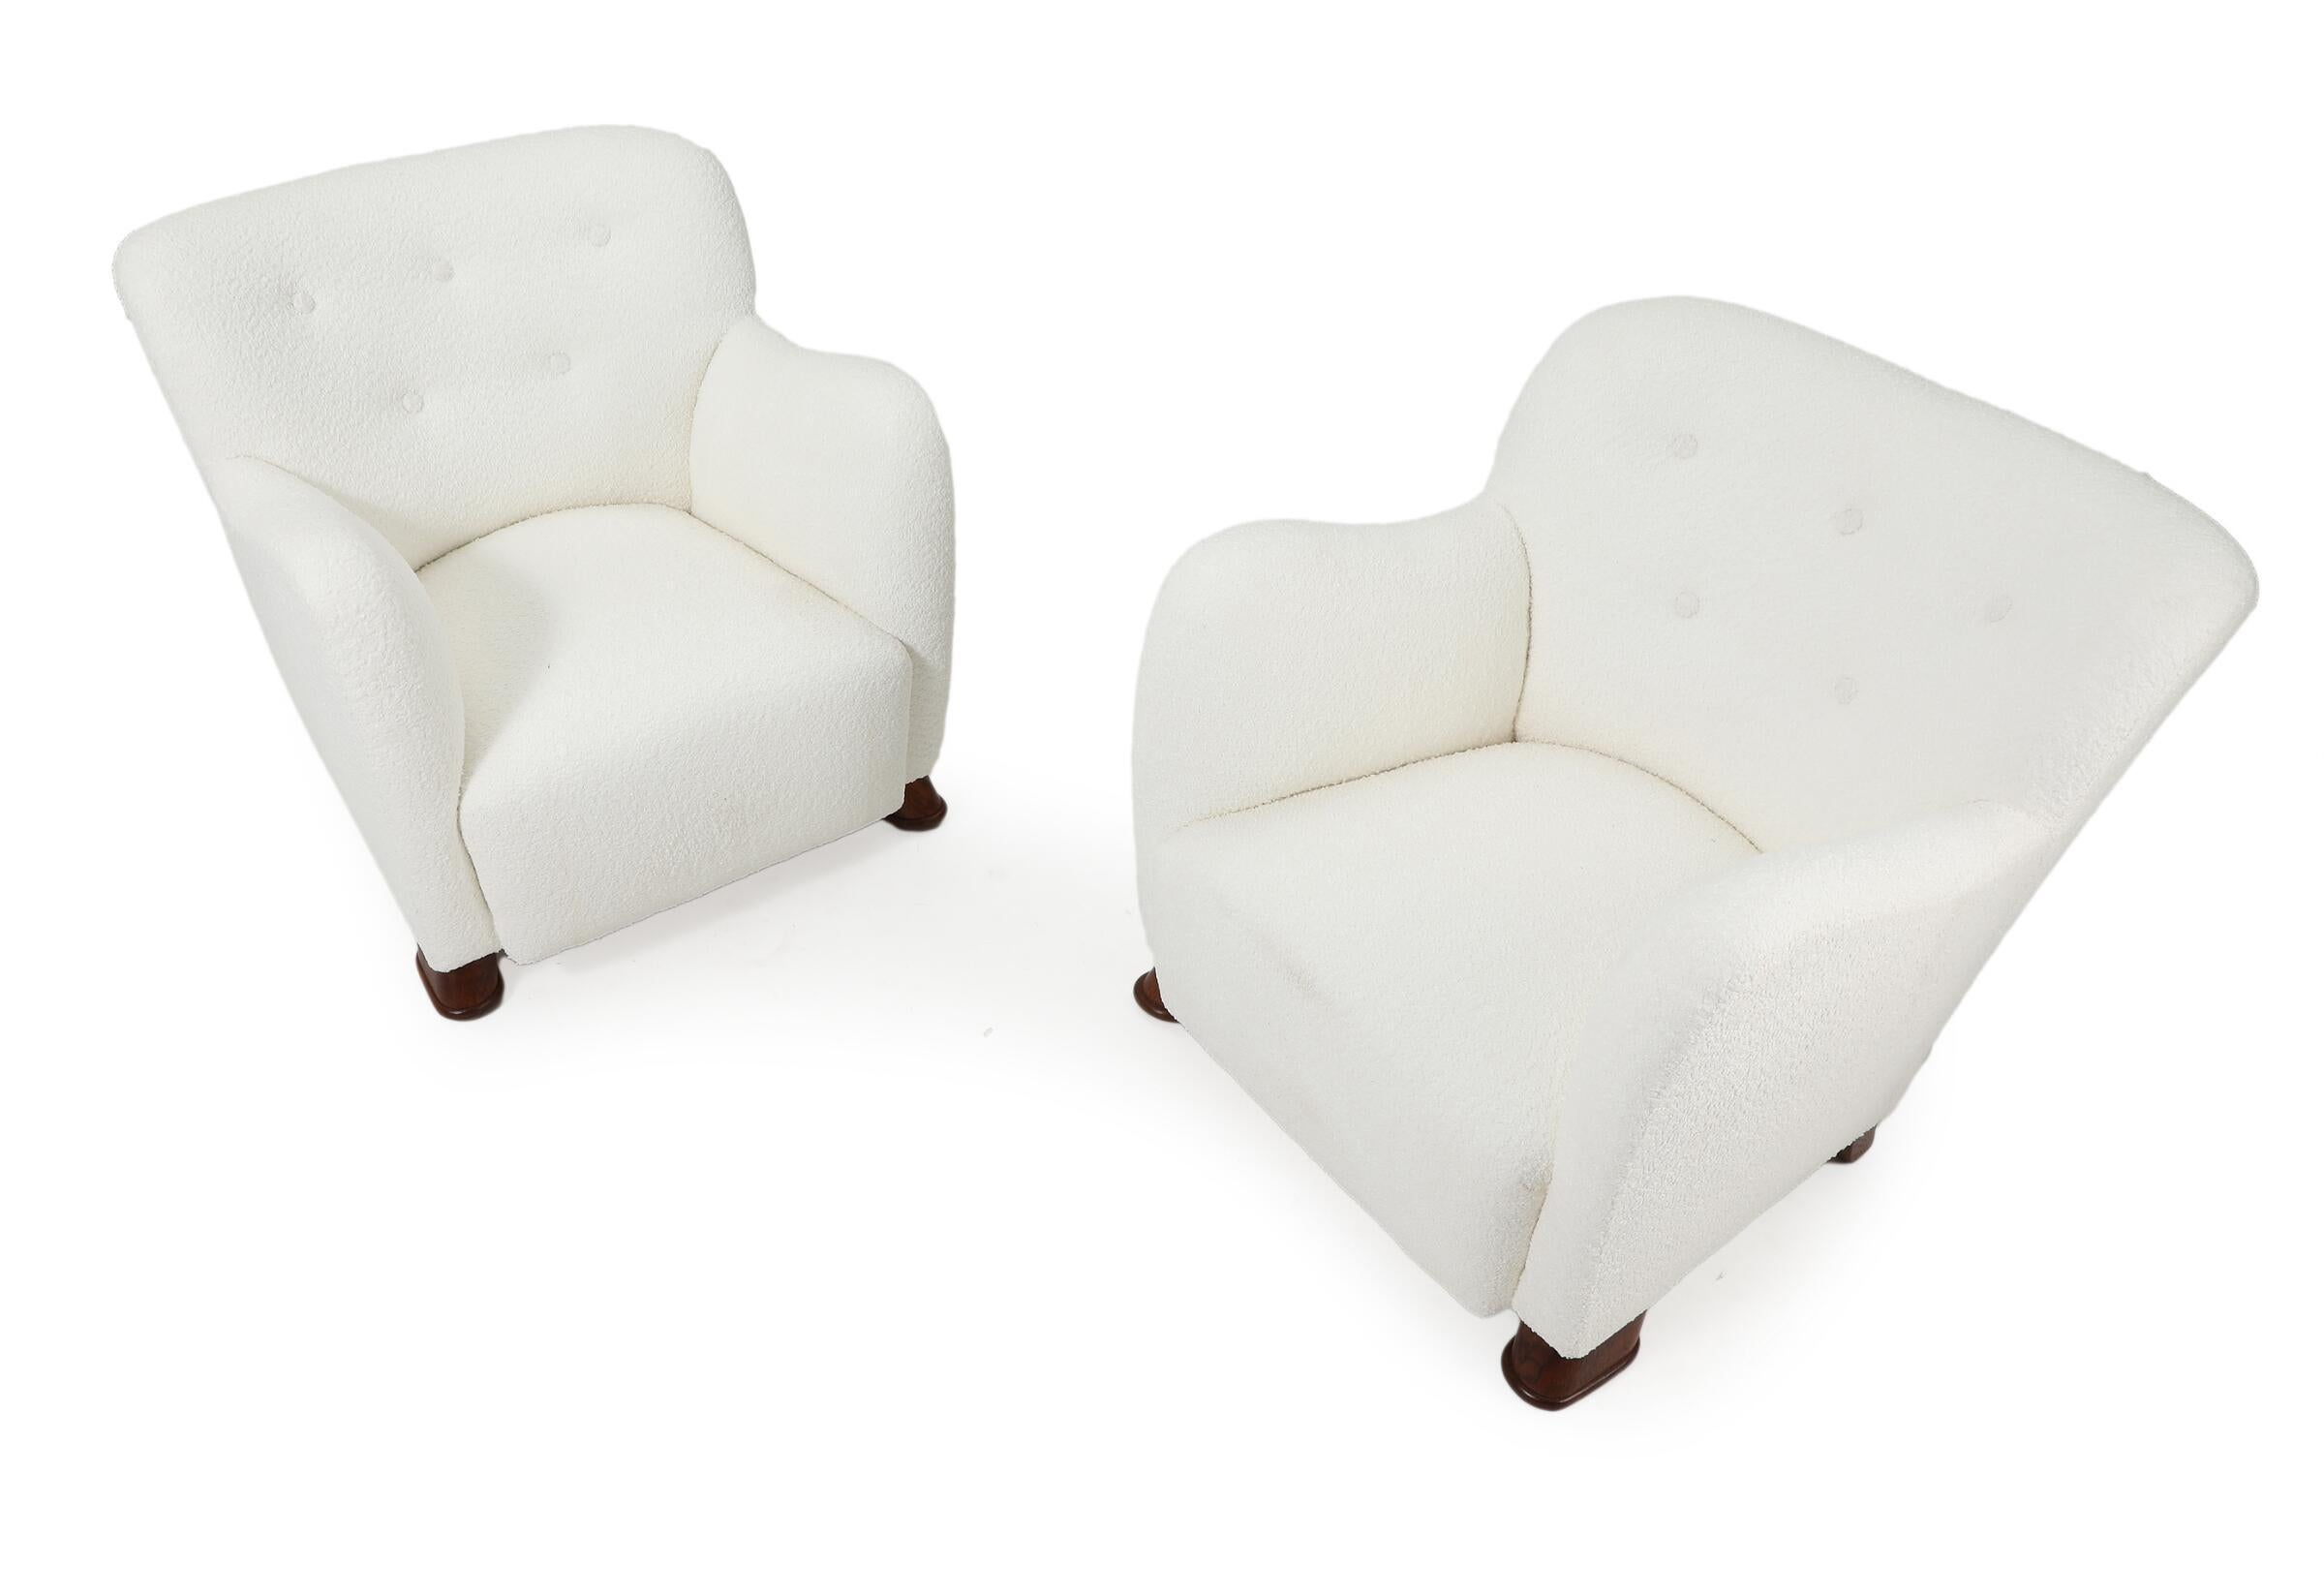 Pair of Danish Design Armchairs Upholstered Light Boucle. Sweden, 1940s In Good Condition For Sale In Bonita Springs, FL